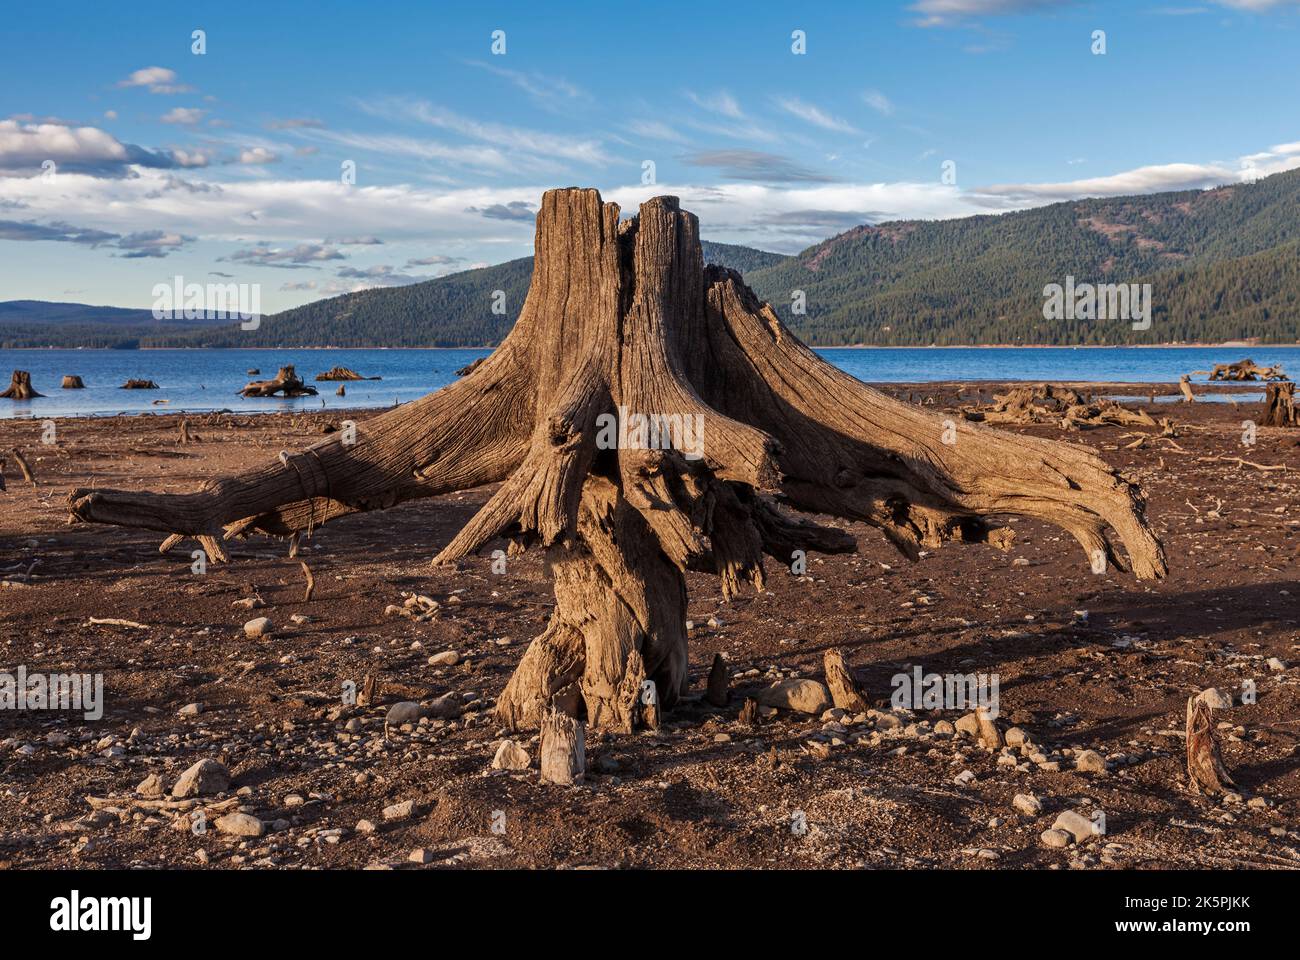 Drought exposes the tap root and trunk of a long ago submerged tree in the low waters of Lake Almanor in Northern California. Stock Photo